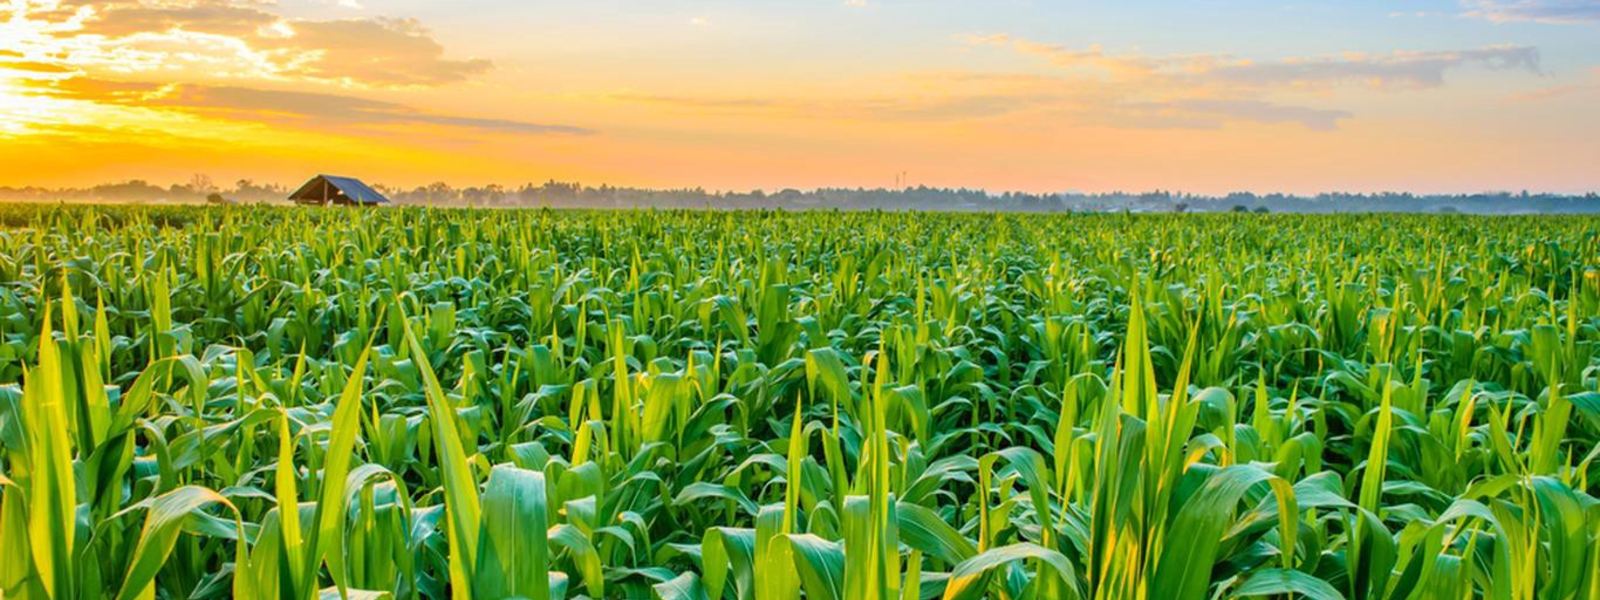 Fertilizer shortage could threaten agriculture sector as a whole – Experts